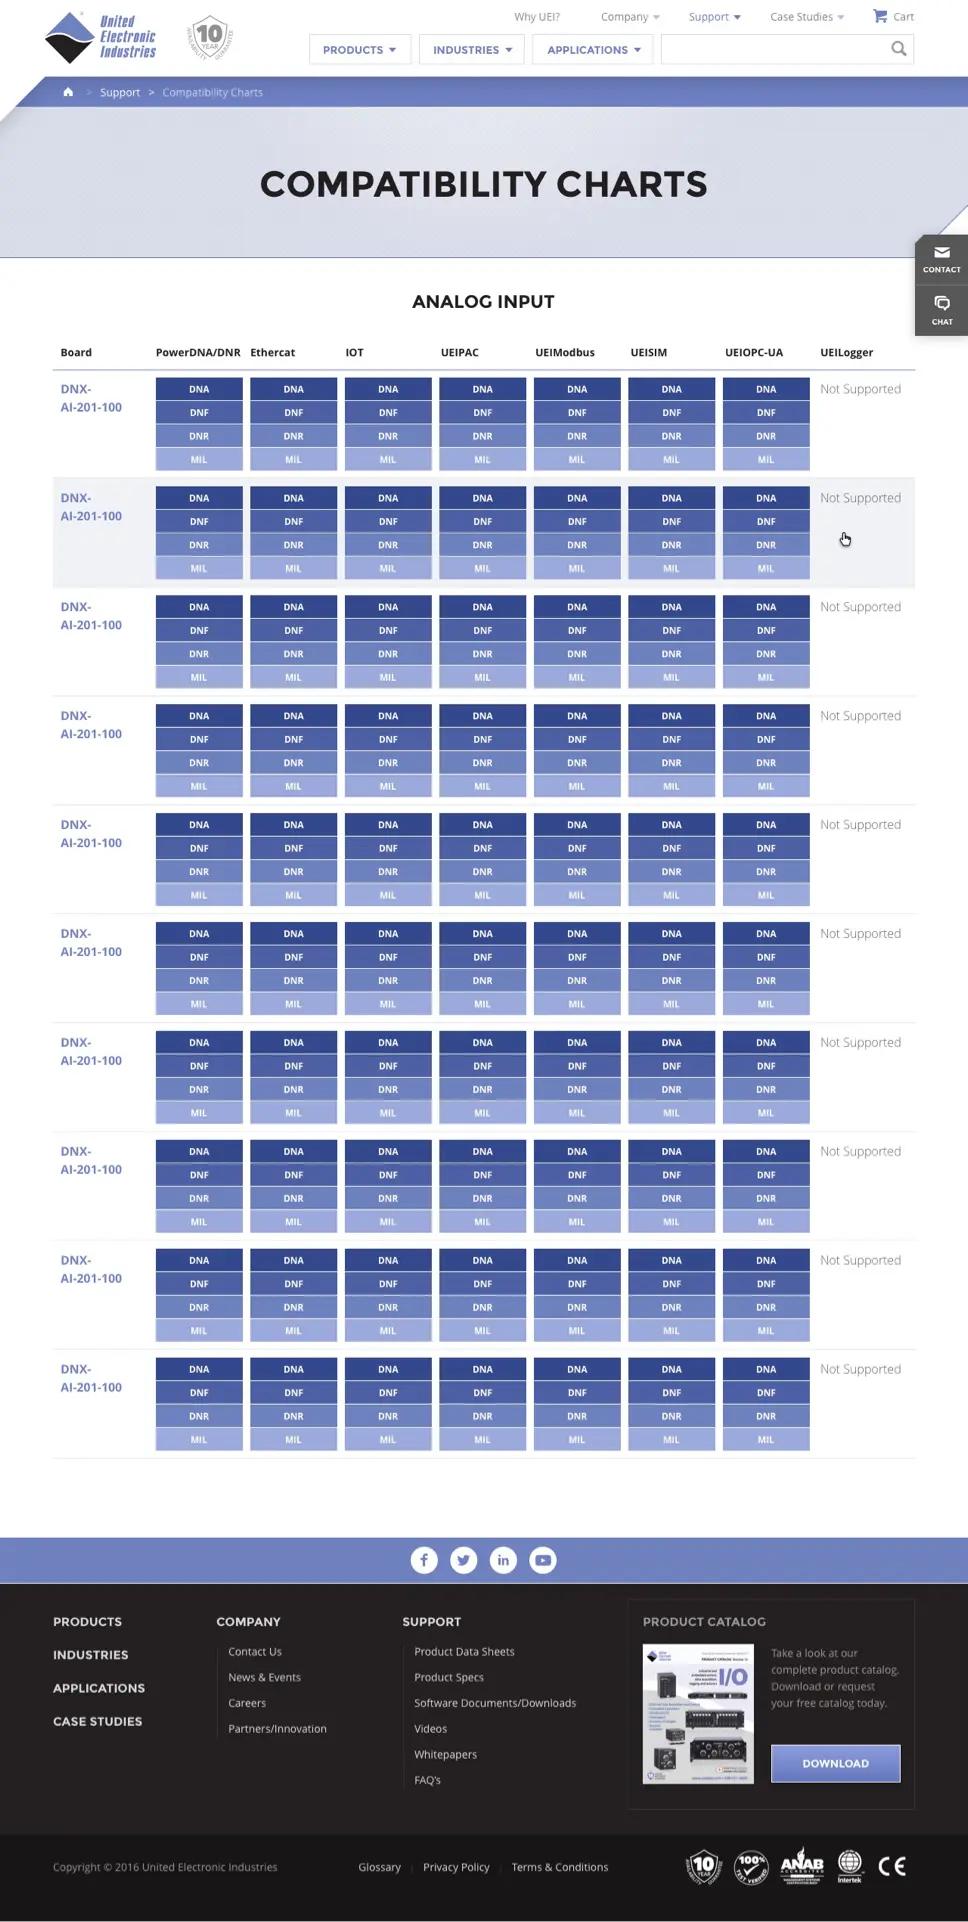 A screenshot of United Electronic Industries' "Compatibility Charts" page.